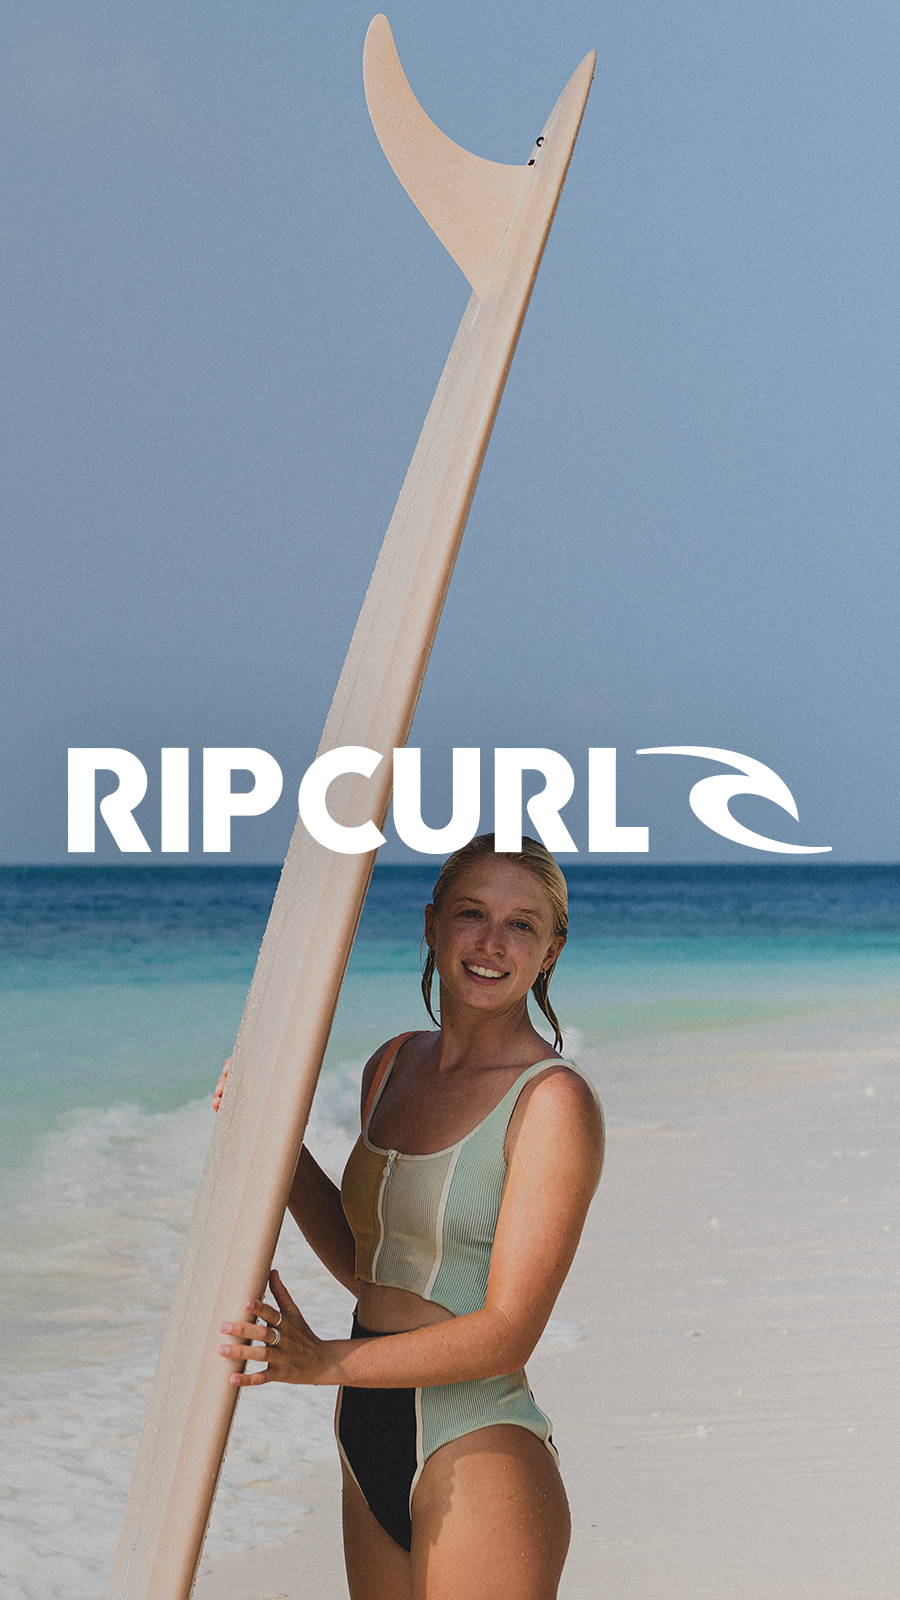 Young woman rucheding on beach in Rip Curl bathing suit holding up surf board